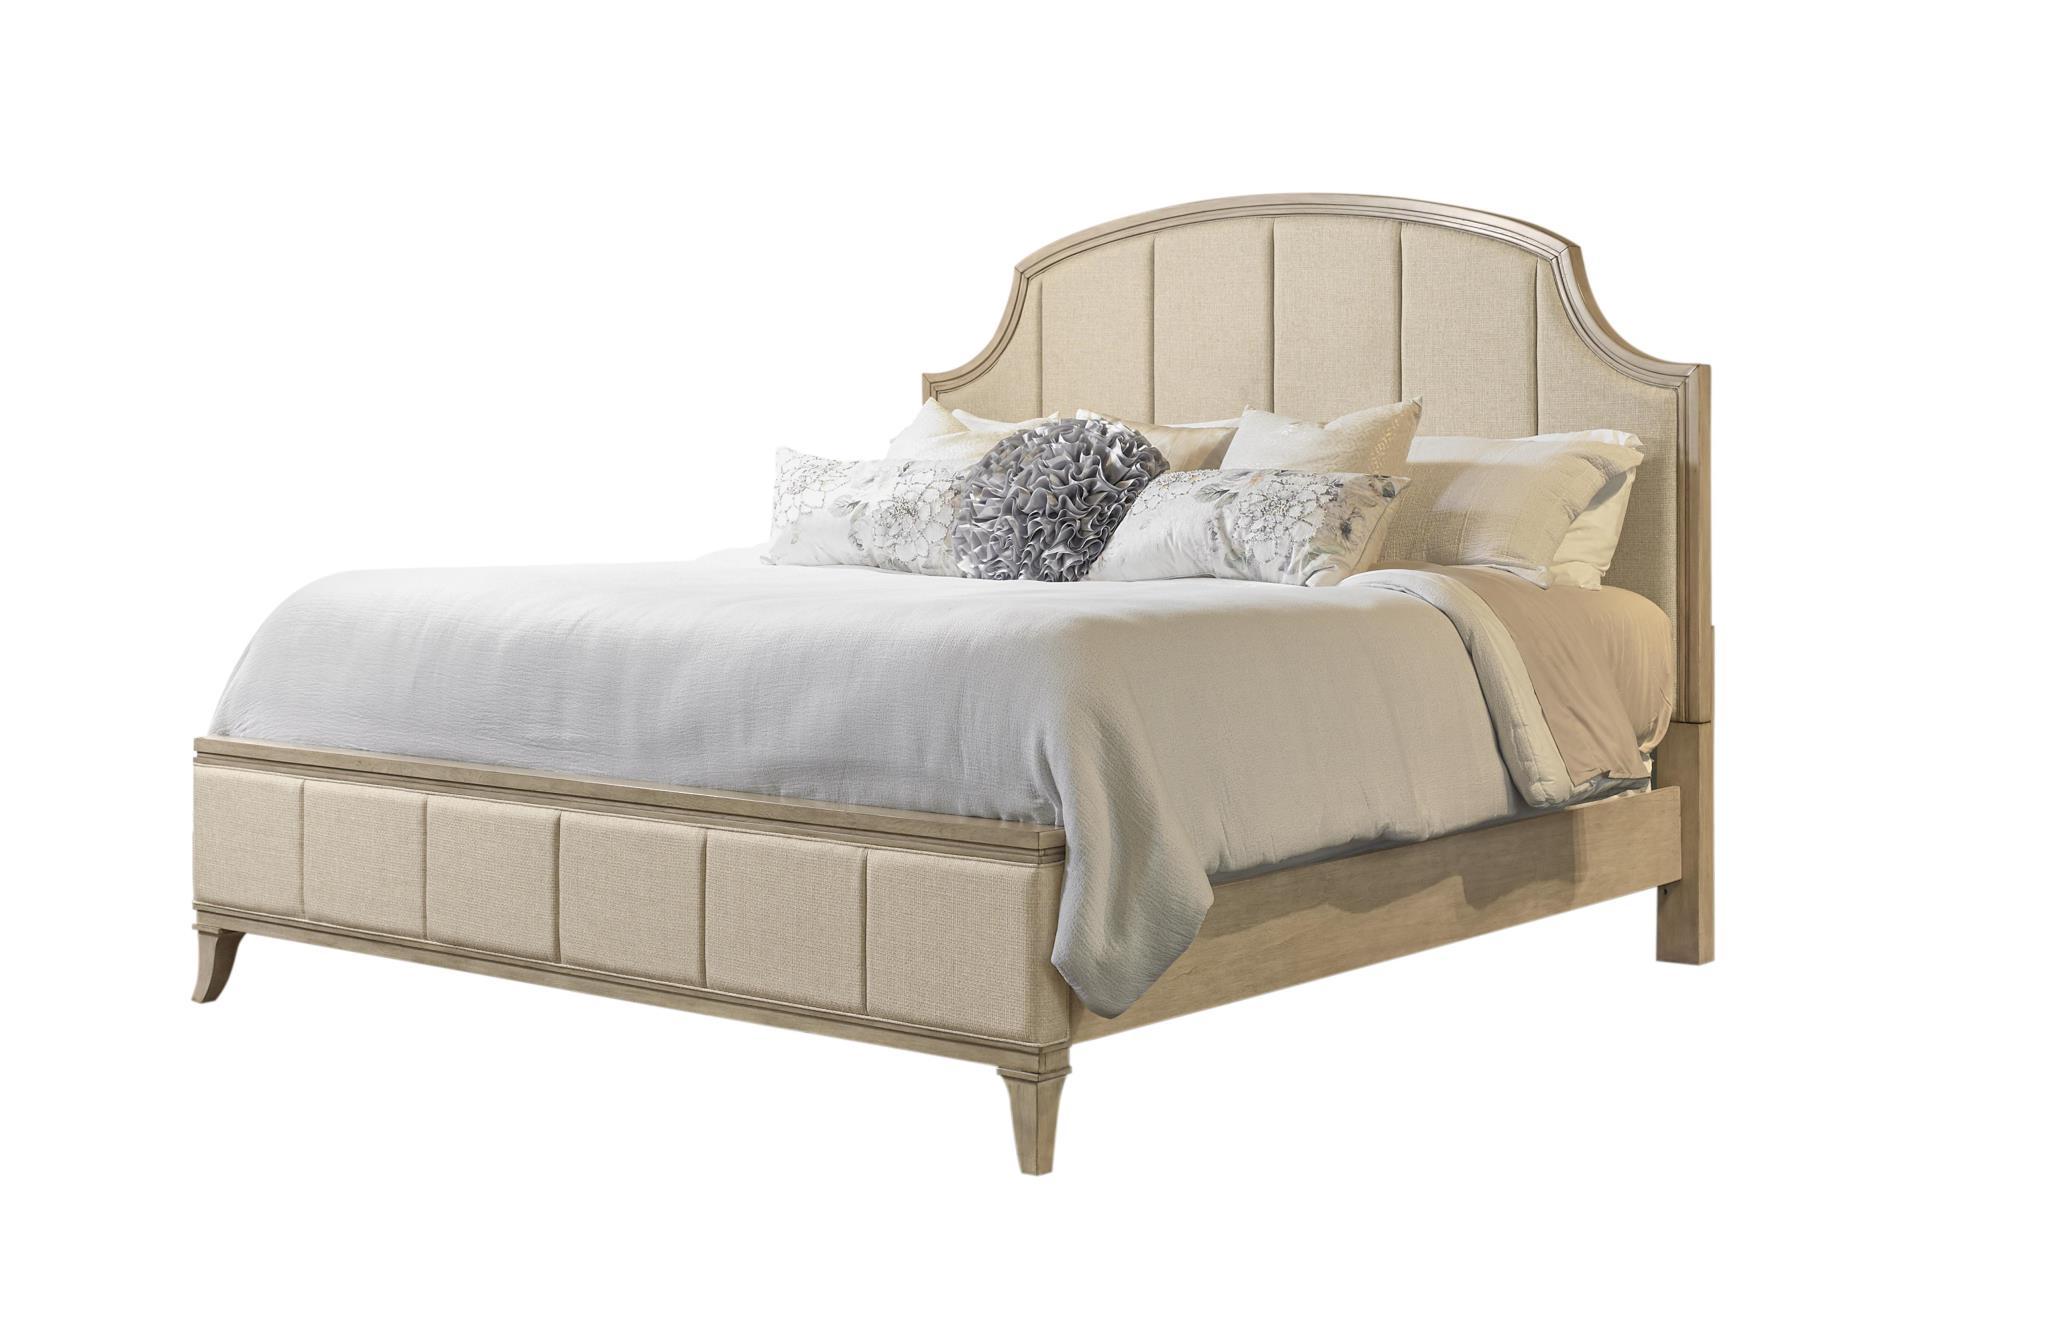 Contemporary, Modern Panel Bed VERONA 320-105 320-105 in Beige Fabric